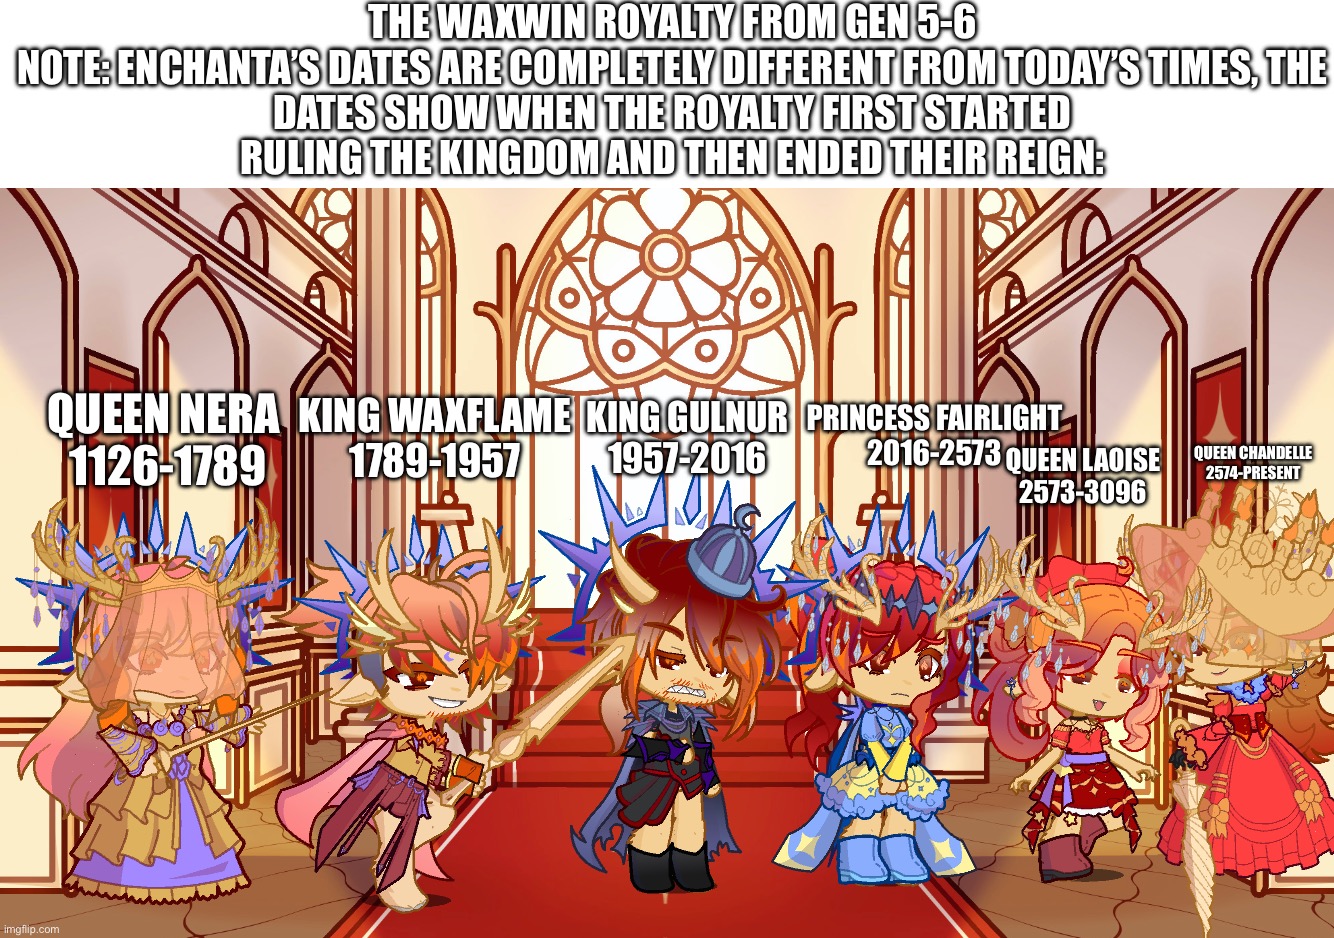 Back with enchanta stuff again also redesigned Queen Chandelle cause I lost her earlier design lol. Feel free to make theories | THE WAXWIN ROYALTY FROM GEN 5-6

NOTE: ENCHANTA’S DATES ARE COMPLETELY DIFFERENT FROM TODAY’S TIMES, THE DATES SHOW WHEN THE ROYALTY FIRST STARTED RULING THE KINGDOM AND THEN ENDED THEIR REIGN:; PRINCESS FAIRLIGHT

2016-2573; KING WAXFLAME

1789-1957; KING GULNUR

1957-2016; QUEEN NERA 

1126-1789; QUEEN CHANDELLE

2574-PRESENT; QUEEN LAOISE

2573-3096 | made w/ Imgflip meme maker